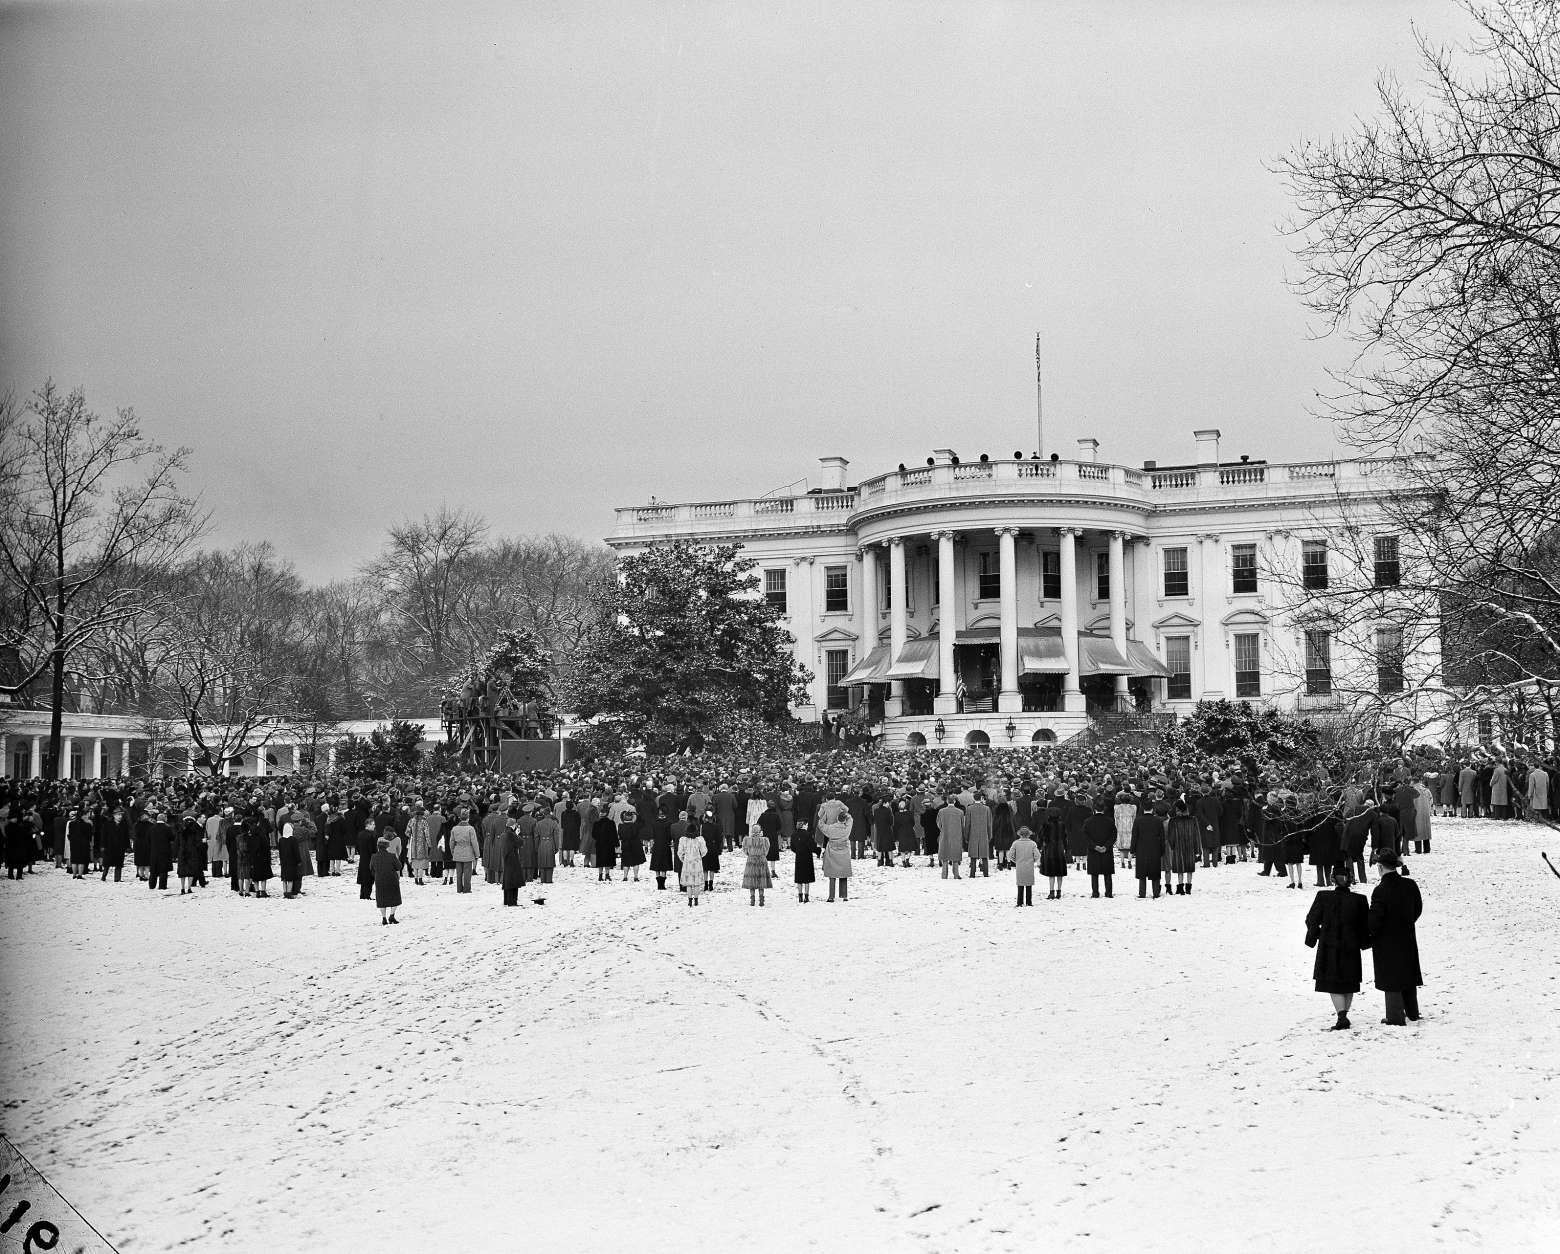 This is a view of the crowds gathered in Washington D.C., for the fourth inauguration of President Franklin D. Roosevelt, Jan. 20, 1945. (AP Photo)